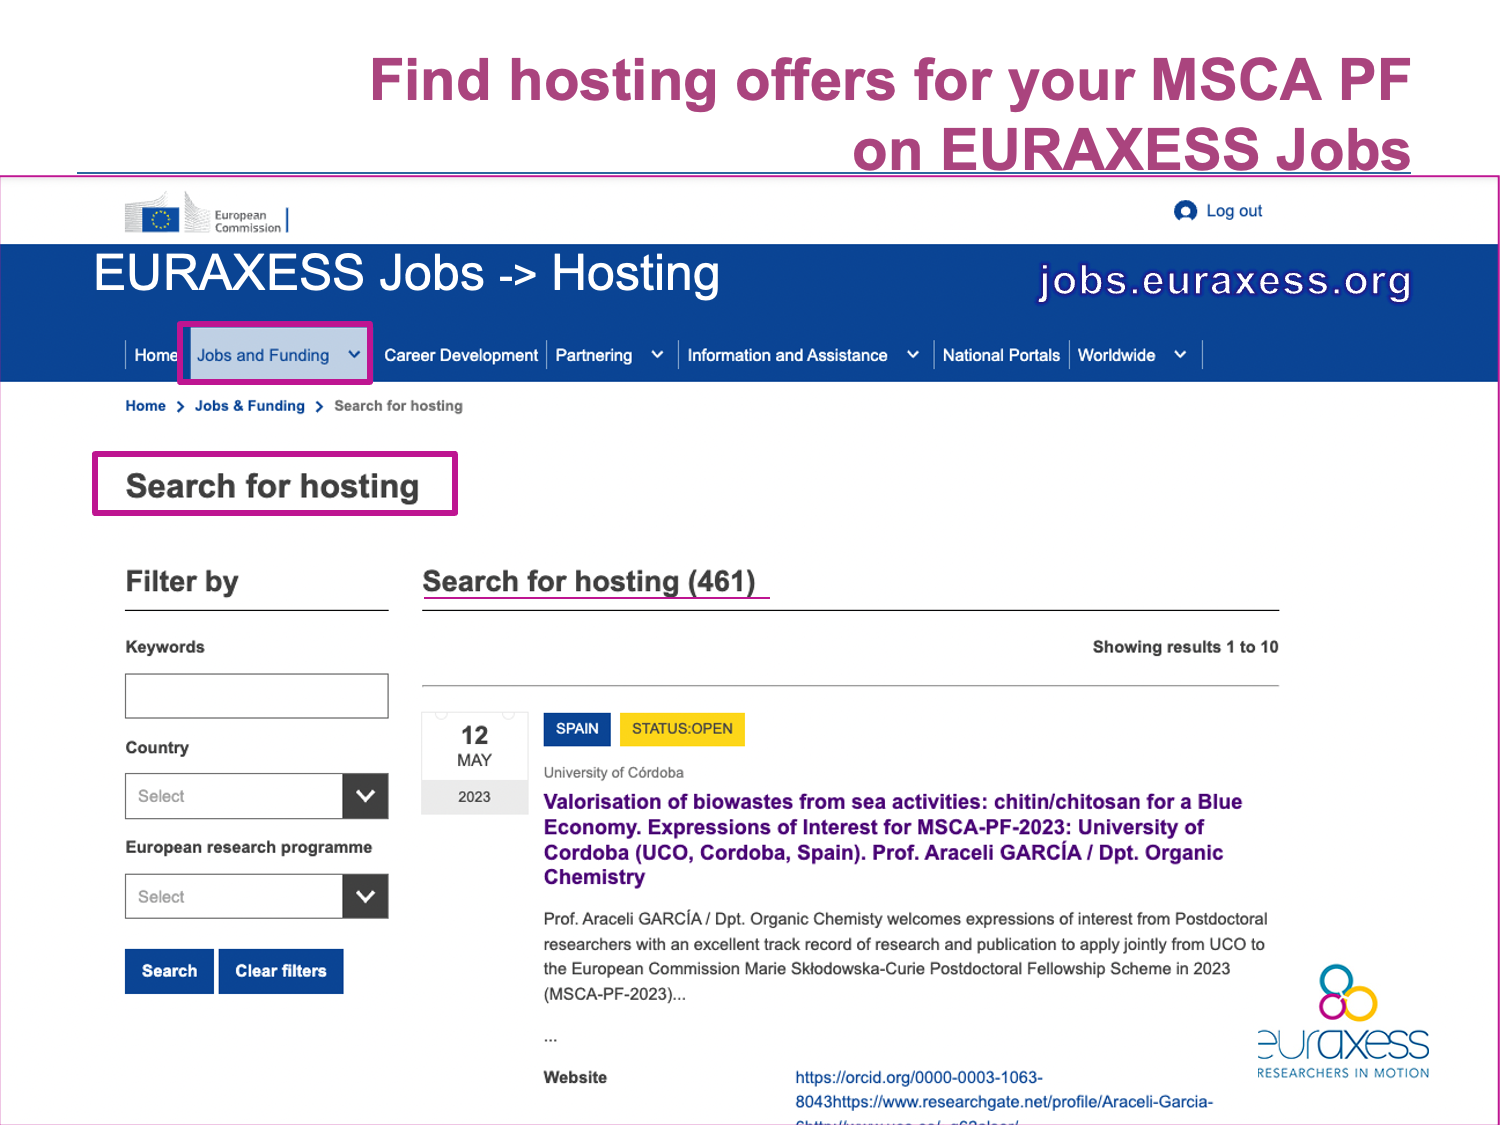 How to find MSCA PF Hosting offers on ERUAXESS Portal